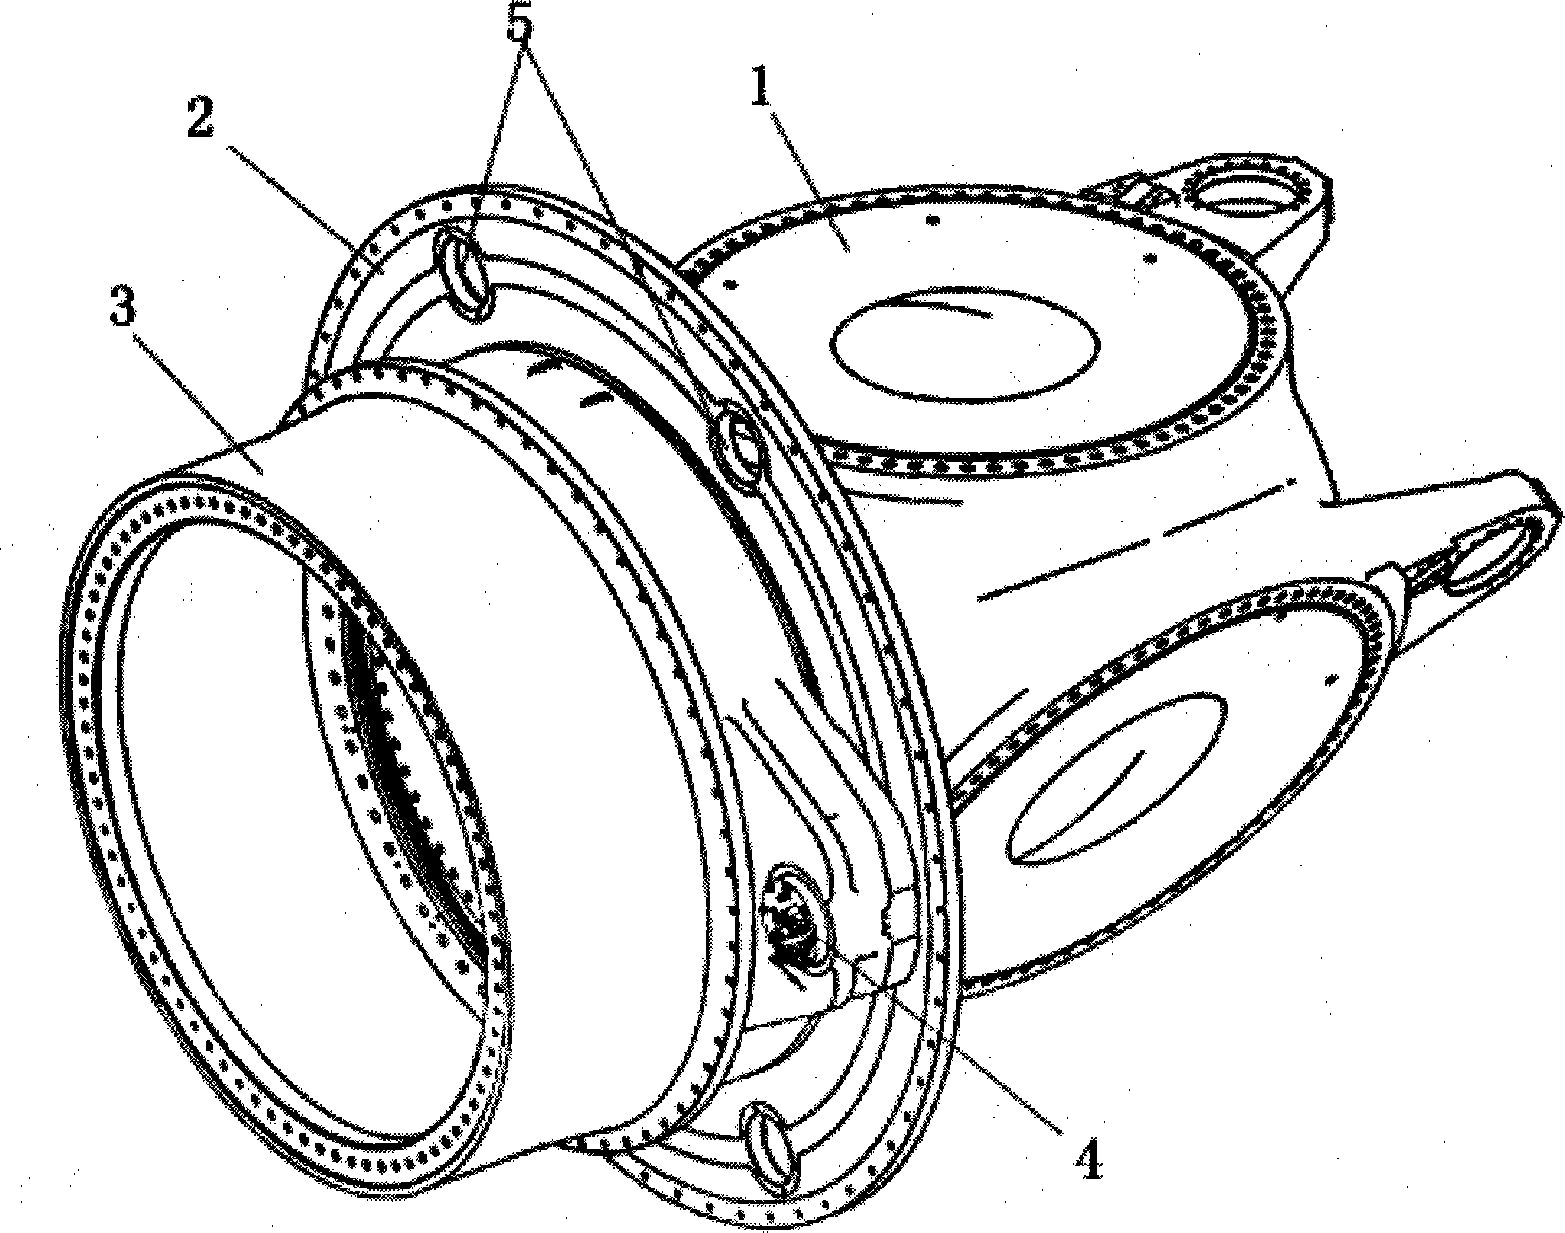 Fan impellor locking device and wind-driven power generator set